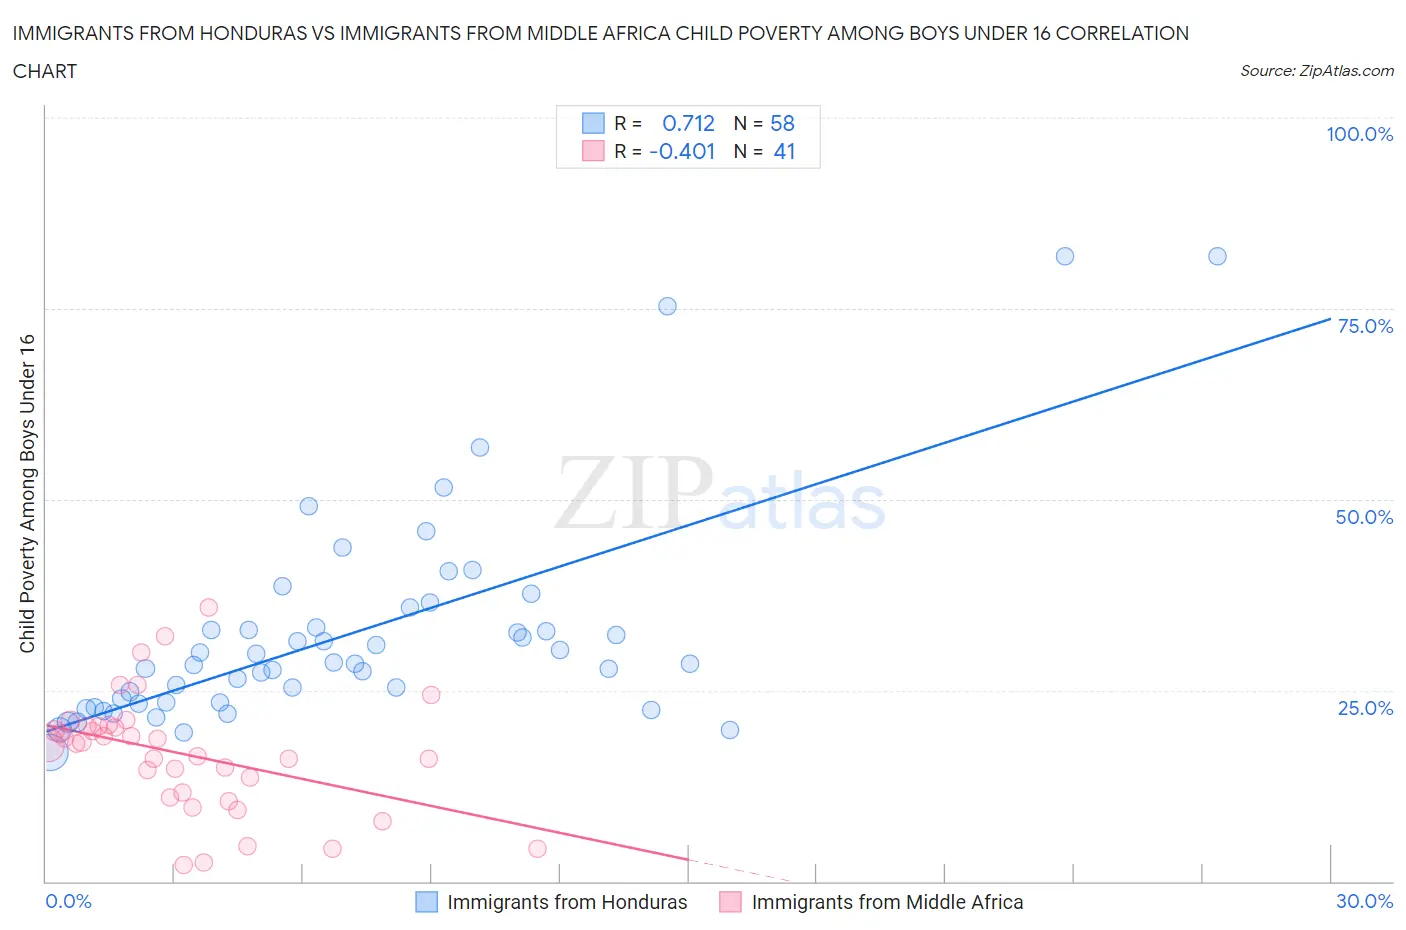 Immigrants from Honduras vs Immigrants from Middle Africa Child Poverty Among Boys Under 16